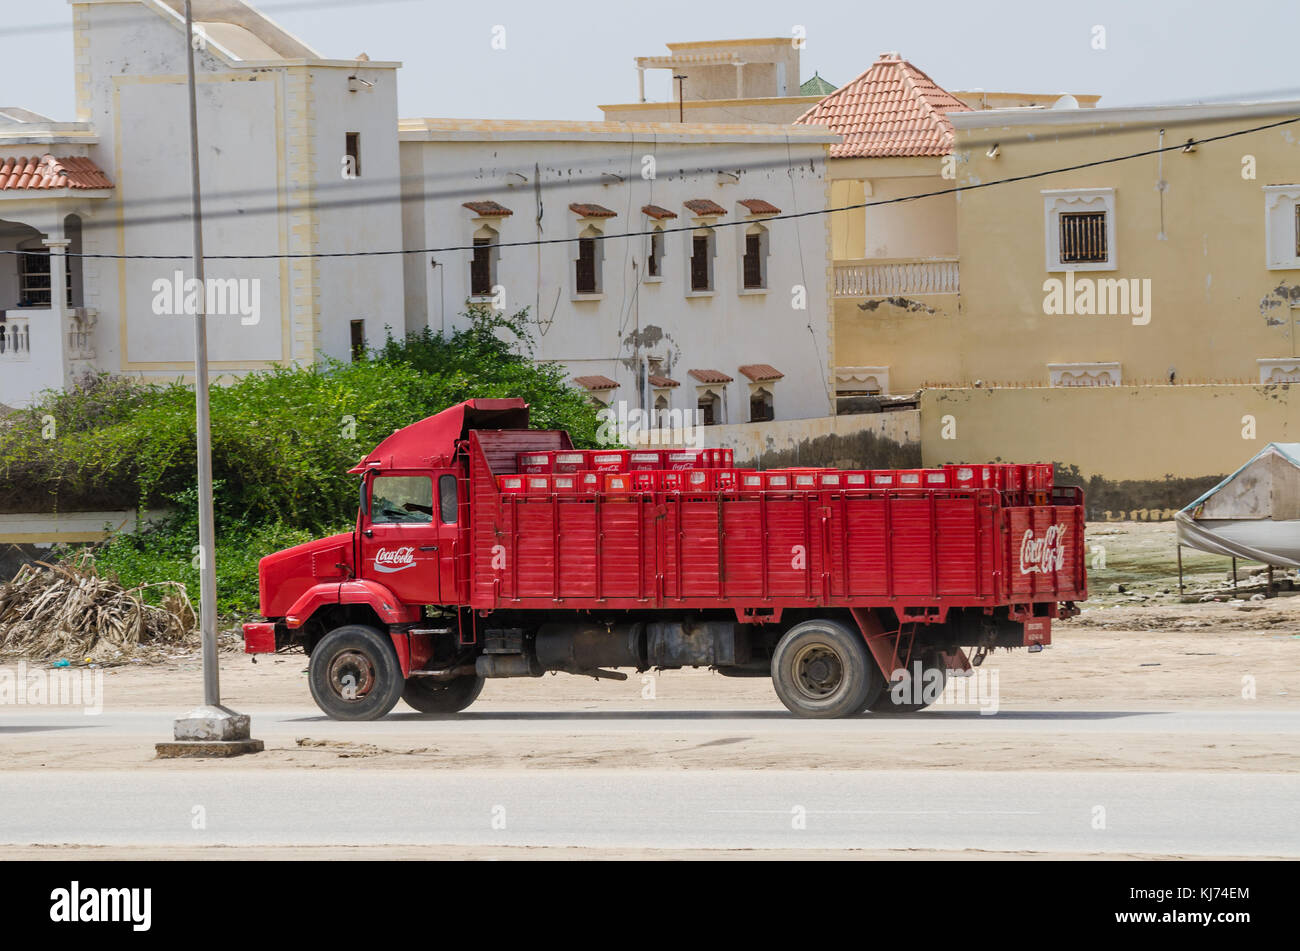 Nouakchott, Mauritania - October 08 2013: Old and classic Coca-Cola truck driving on dirt road in capital Stock Photo